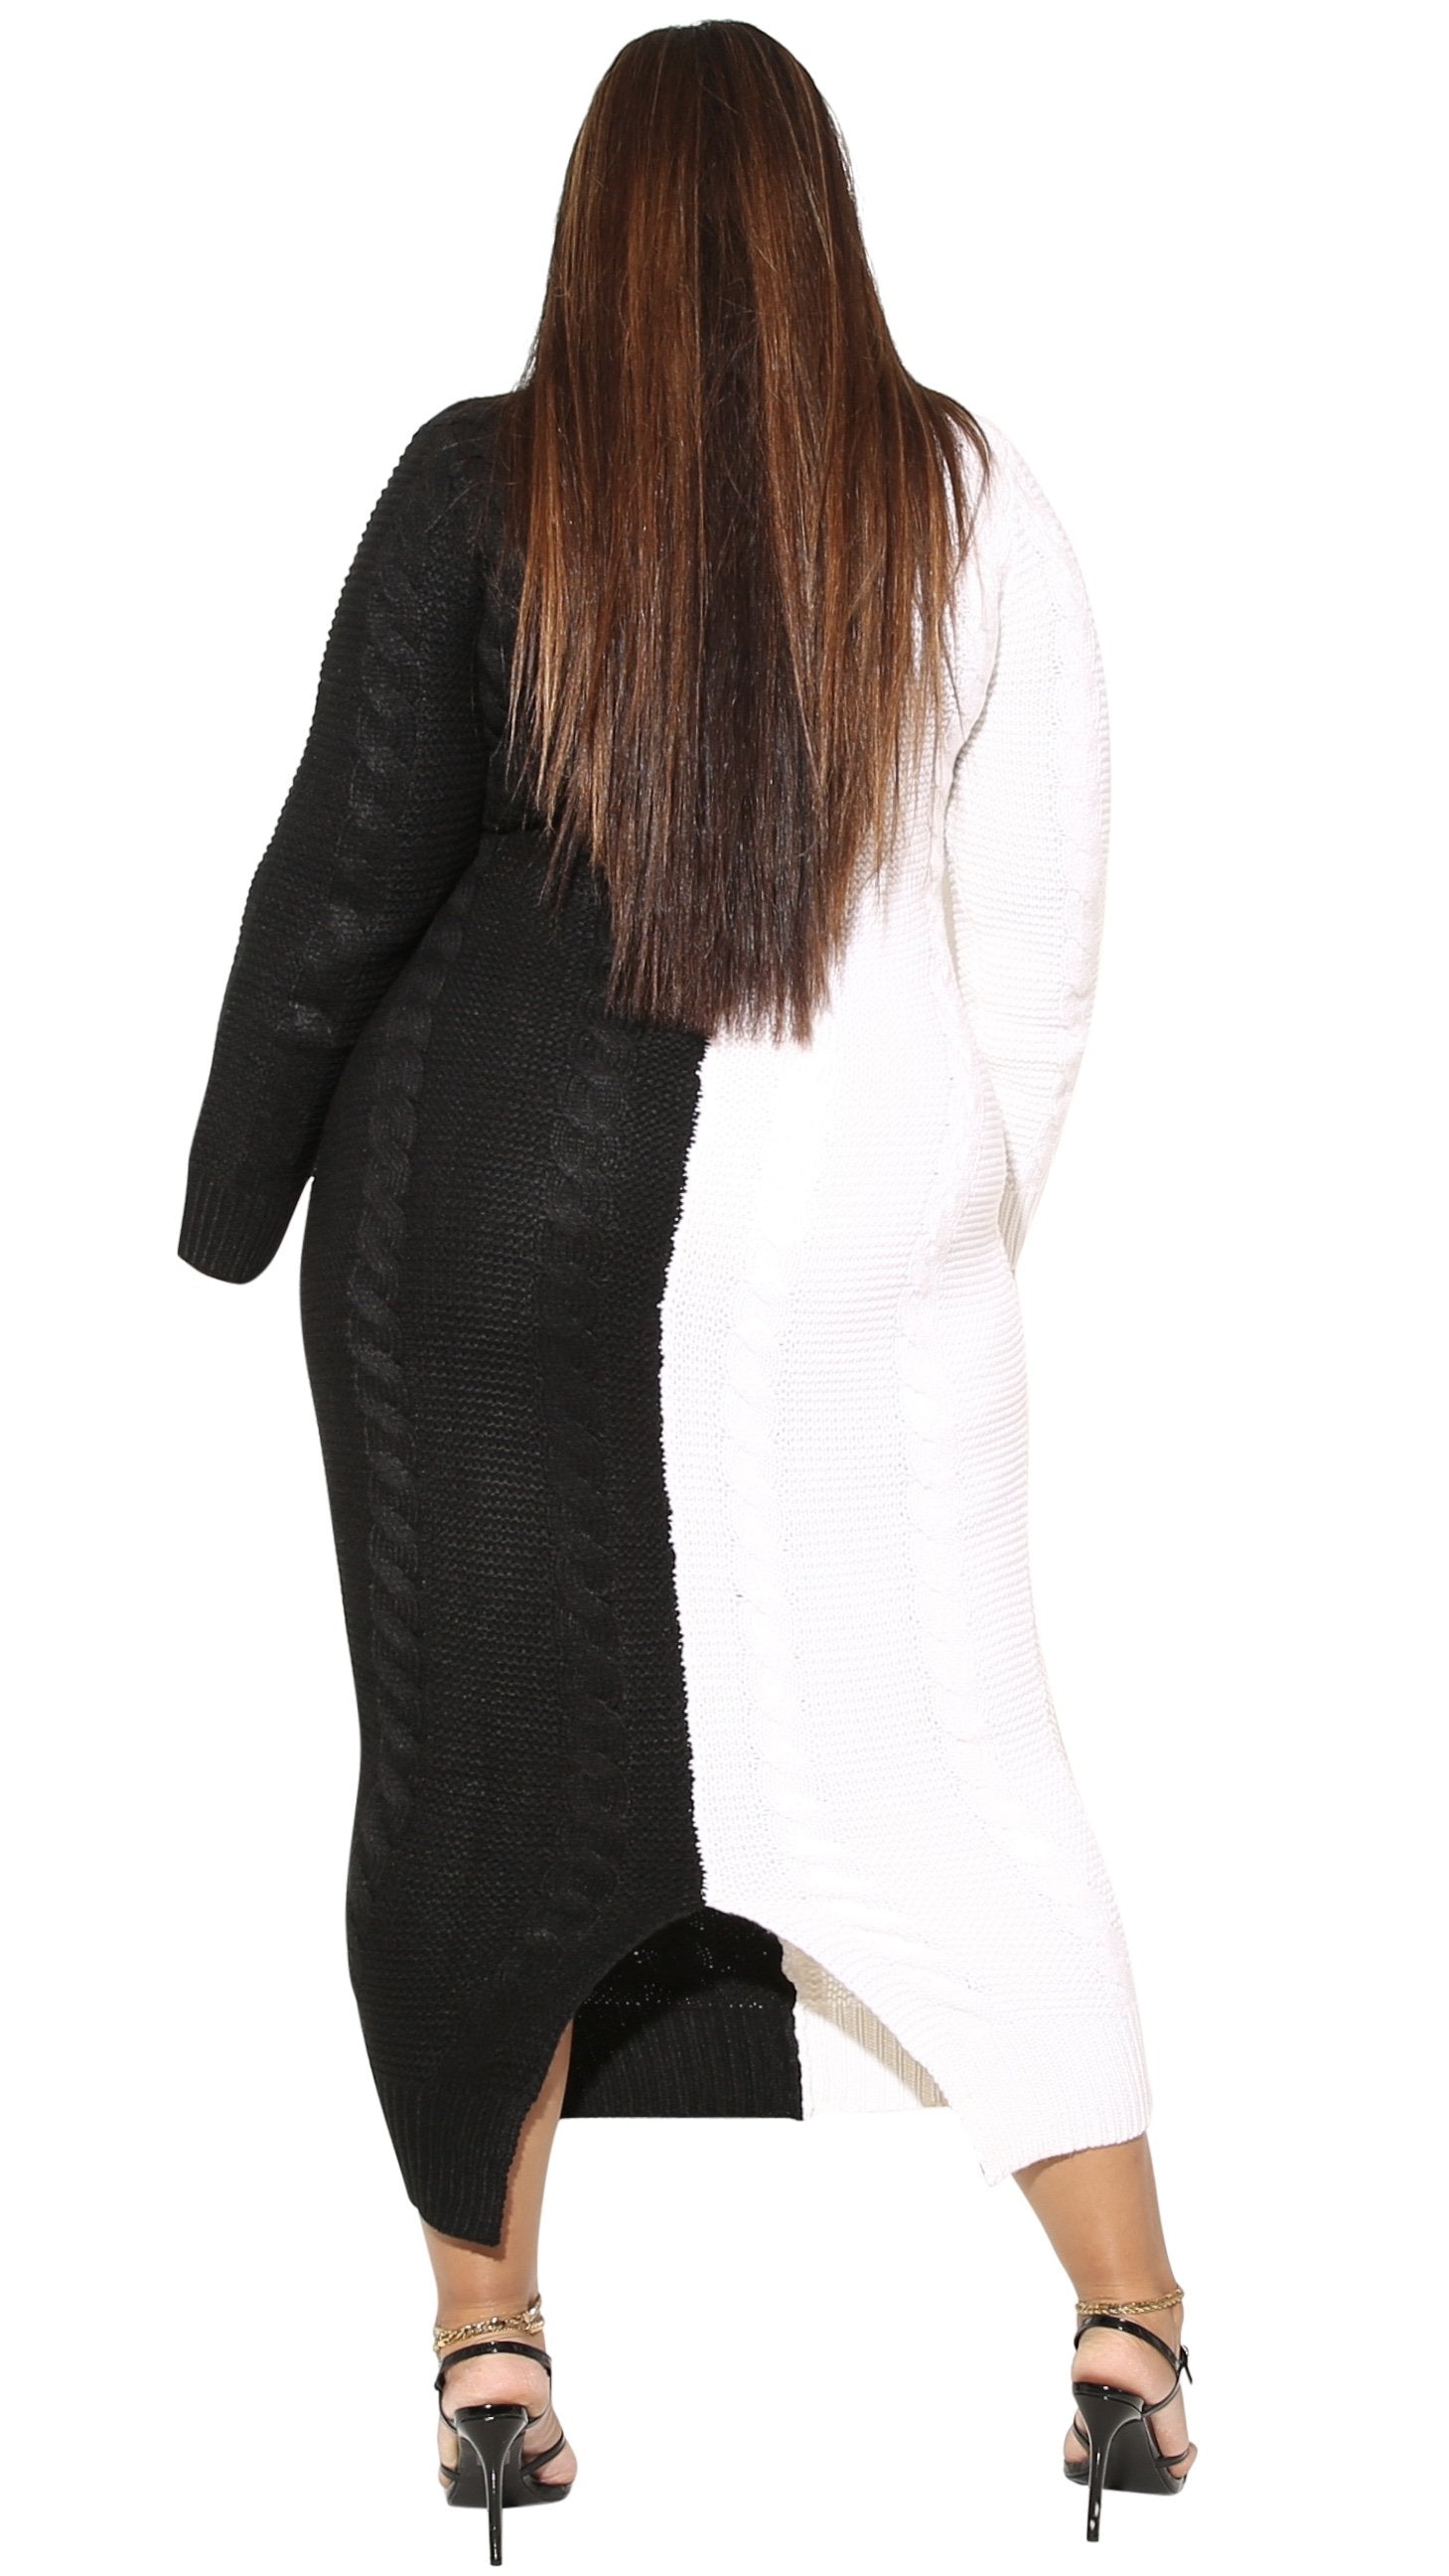 Timeless Maxi Sweater Dress (Black/White)-Maxi Dresses-Boughie-Boughie